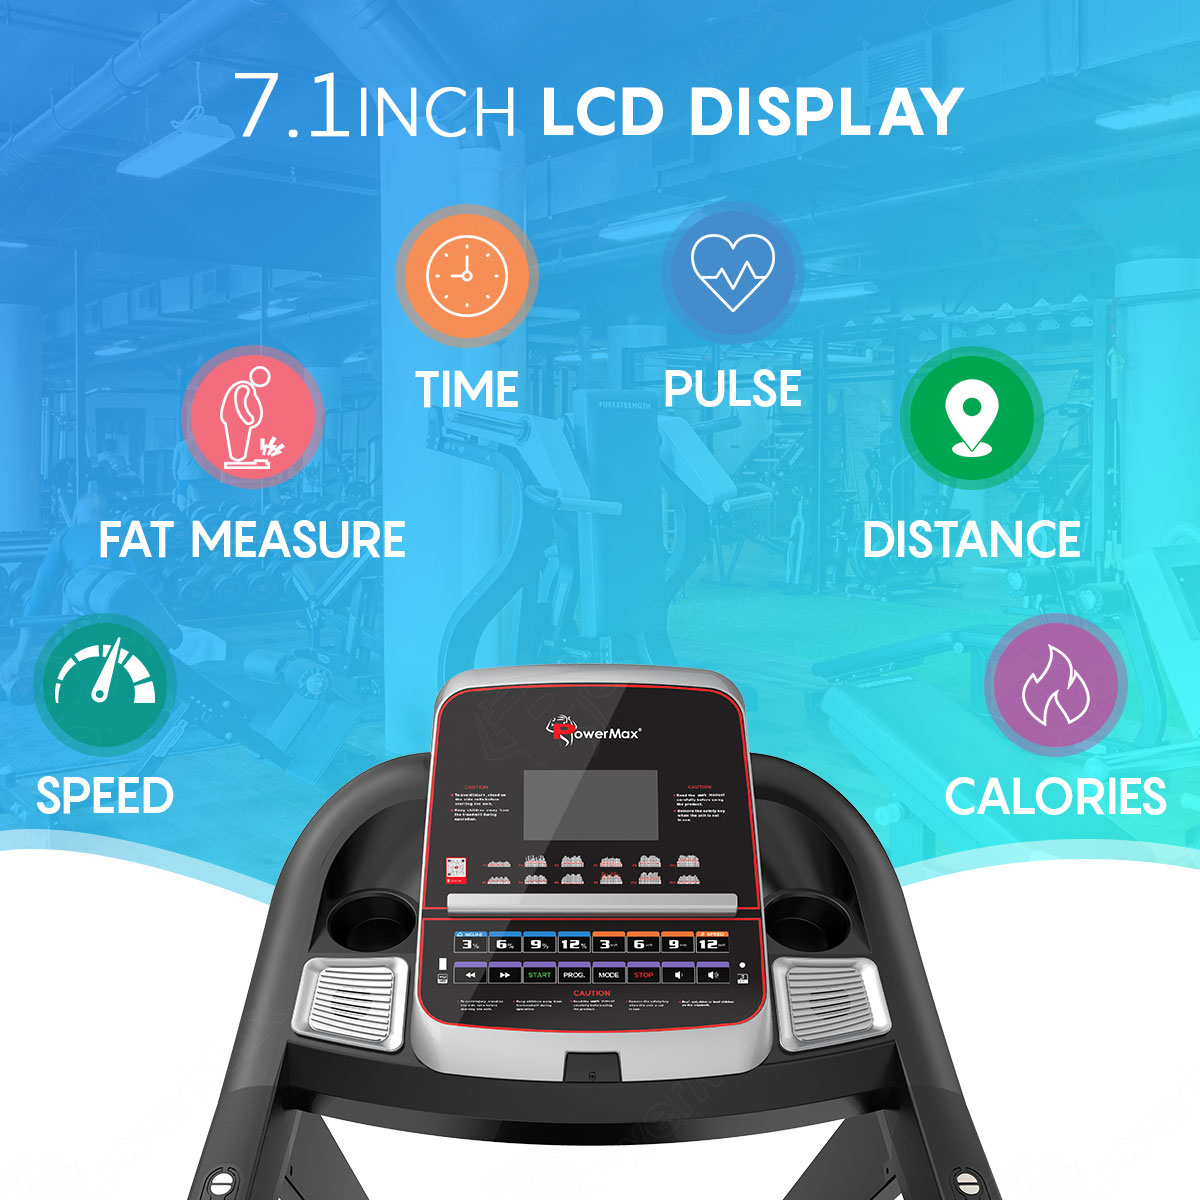 TAC-1500 Commercial Motorized AC Treadmill